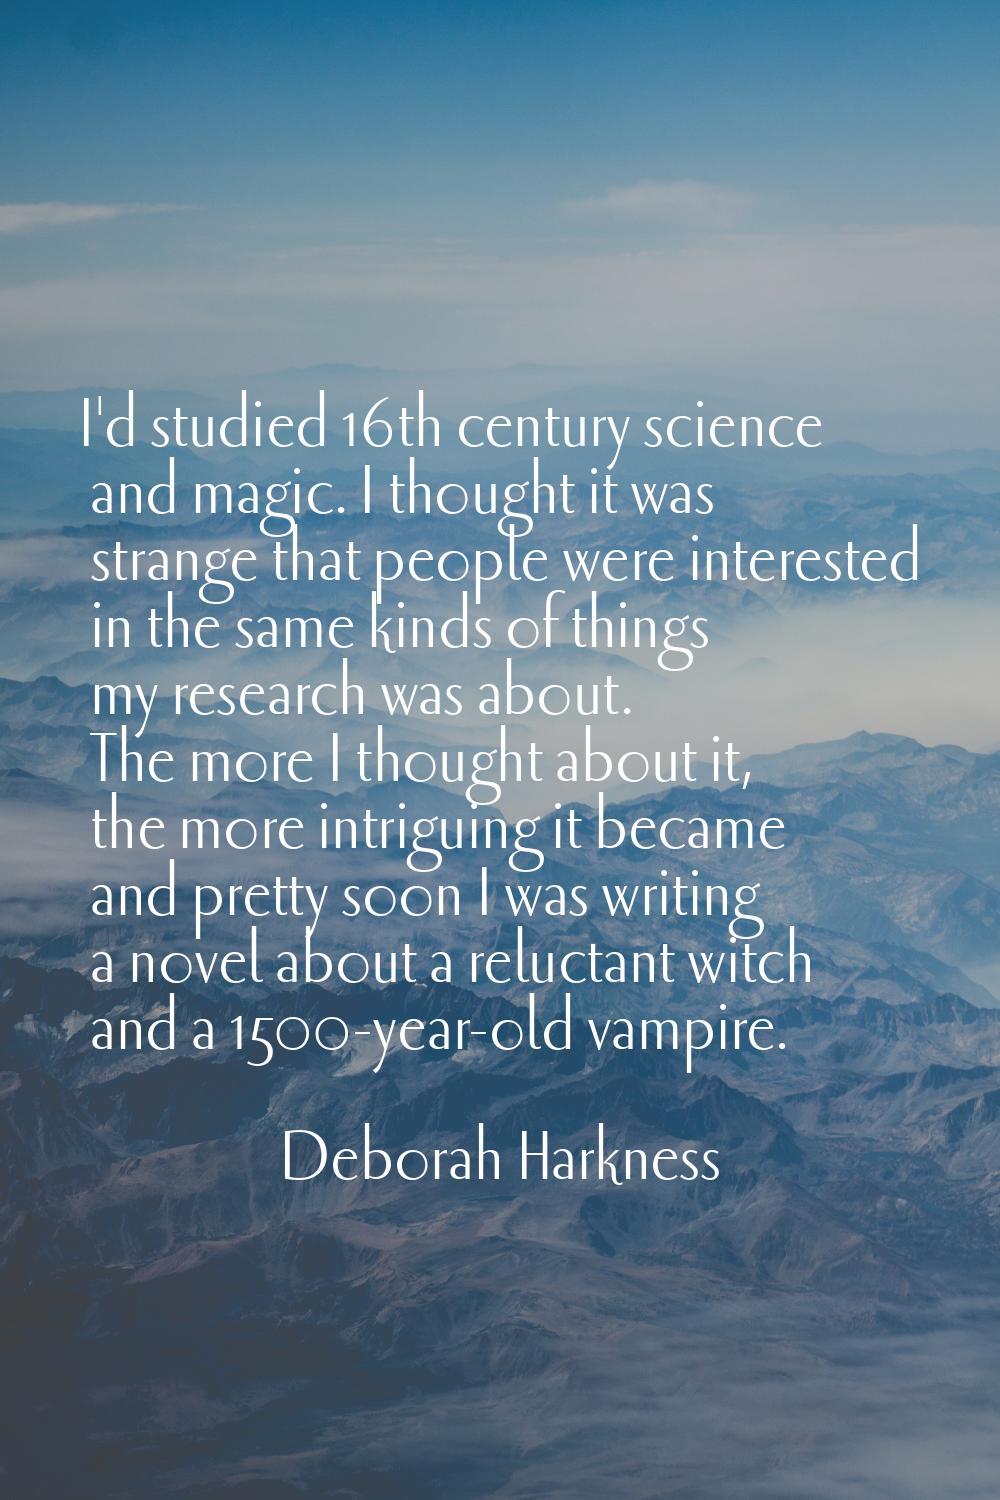 I'd studied 16th century science and magic. I thought it was strange that people were interested in